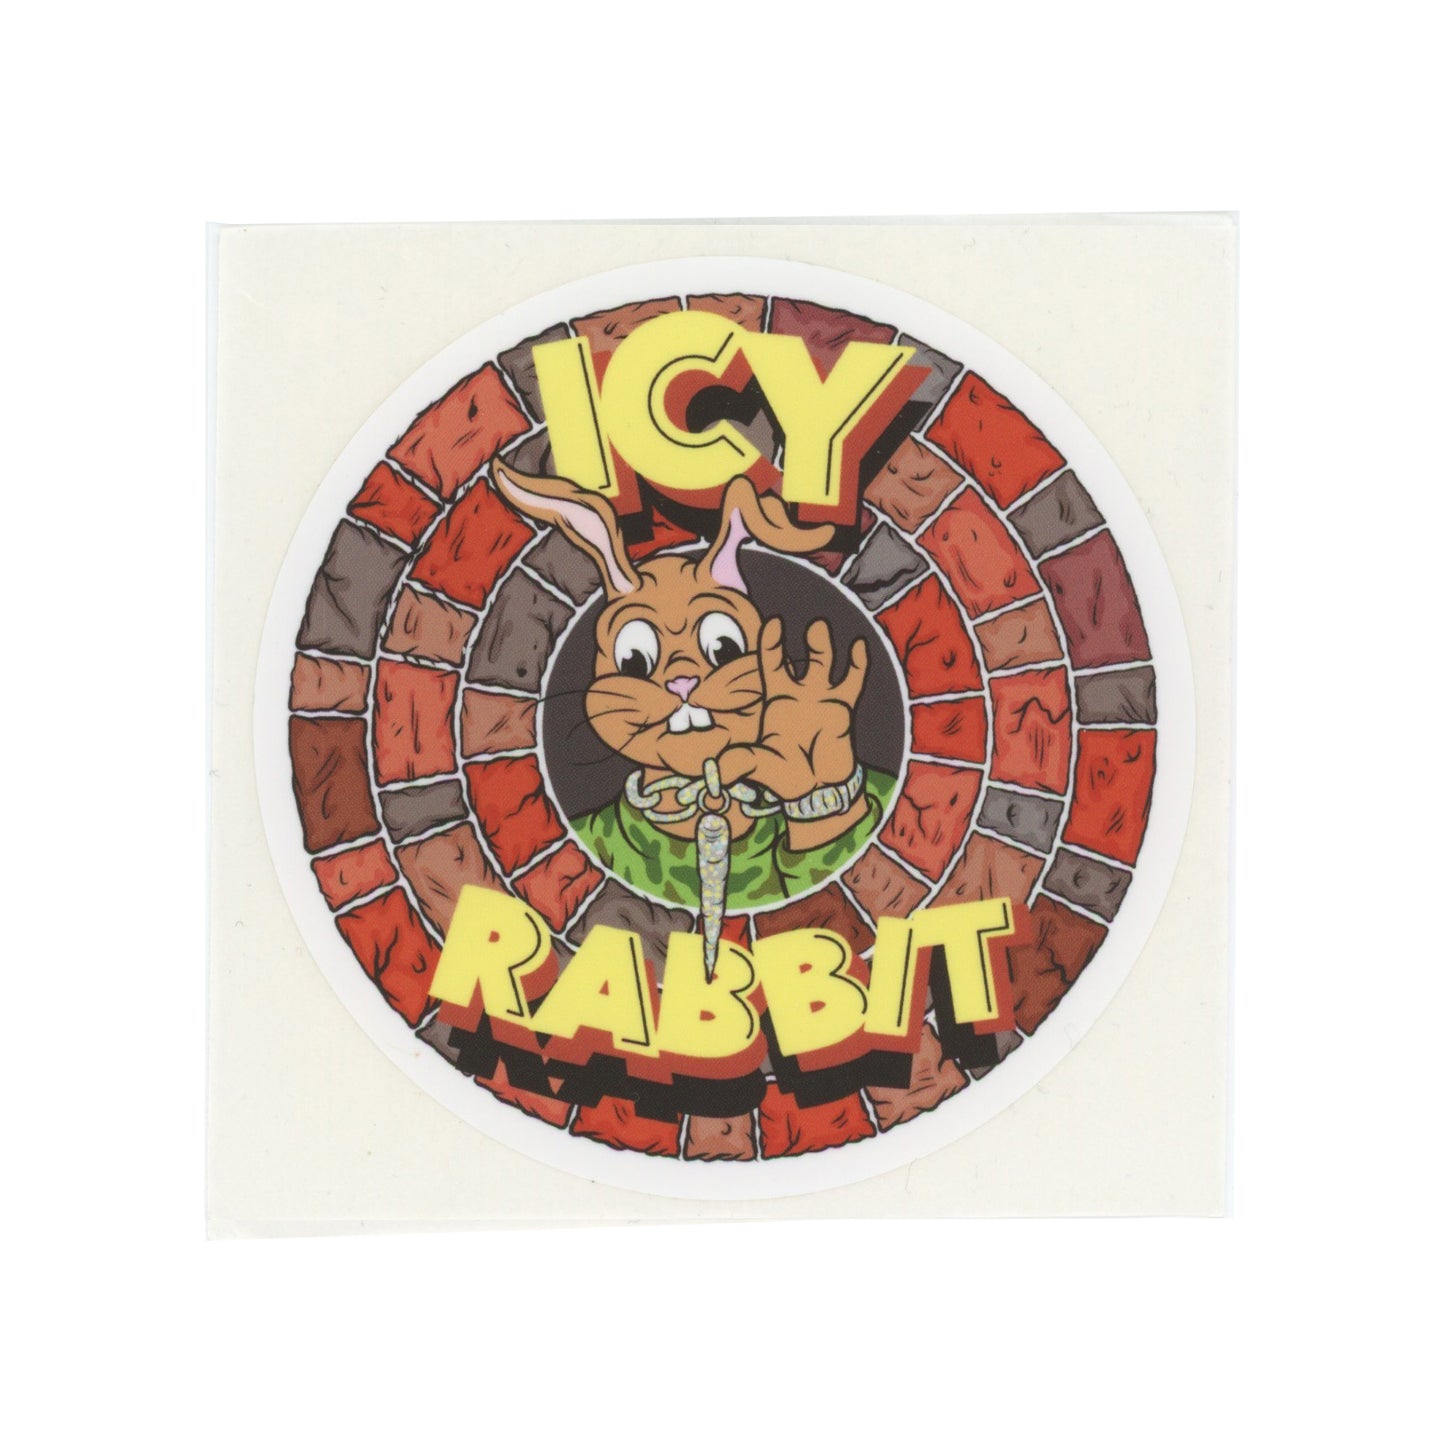 Icy Rabbit with Carrot Chain Sticker